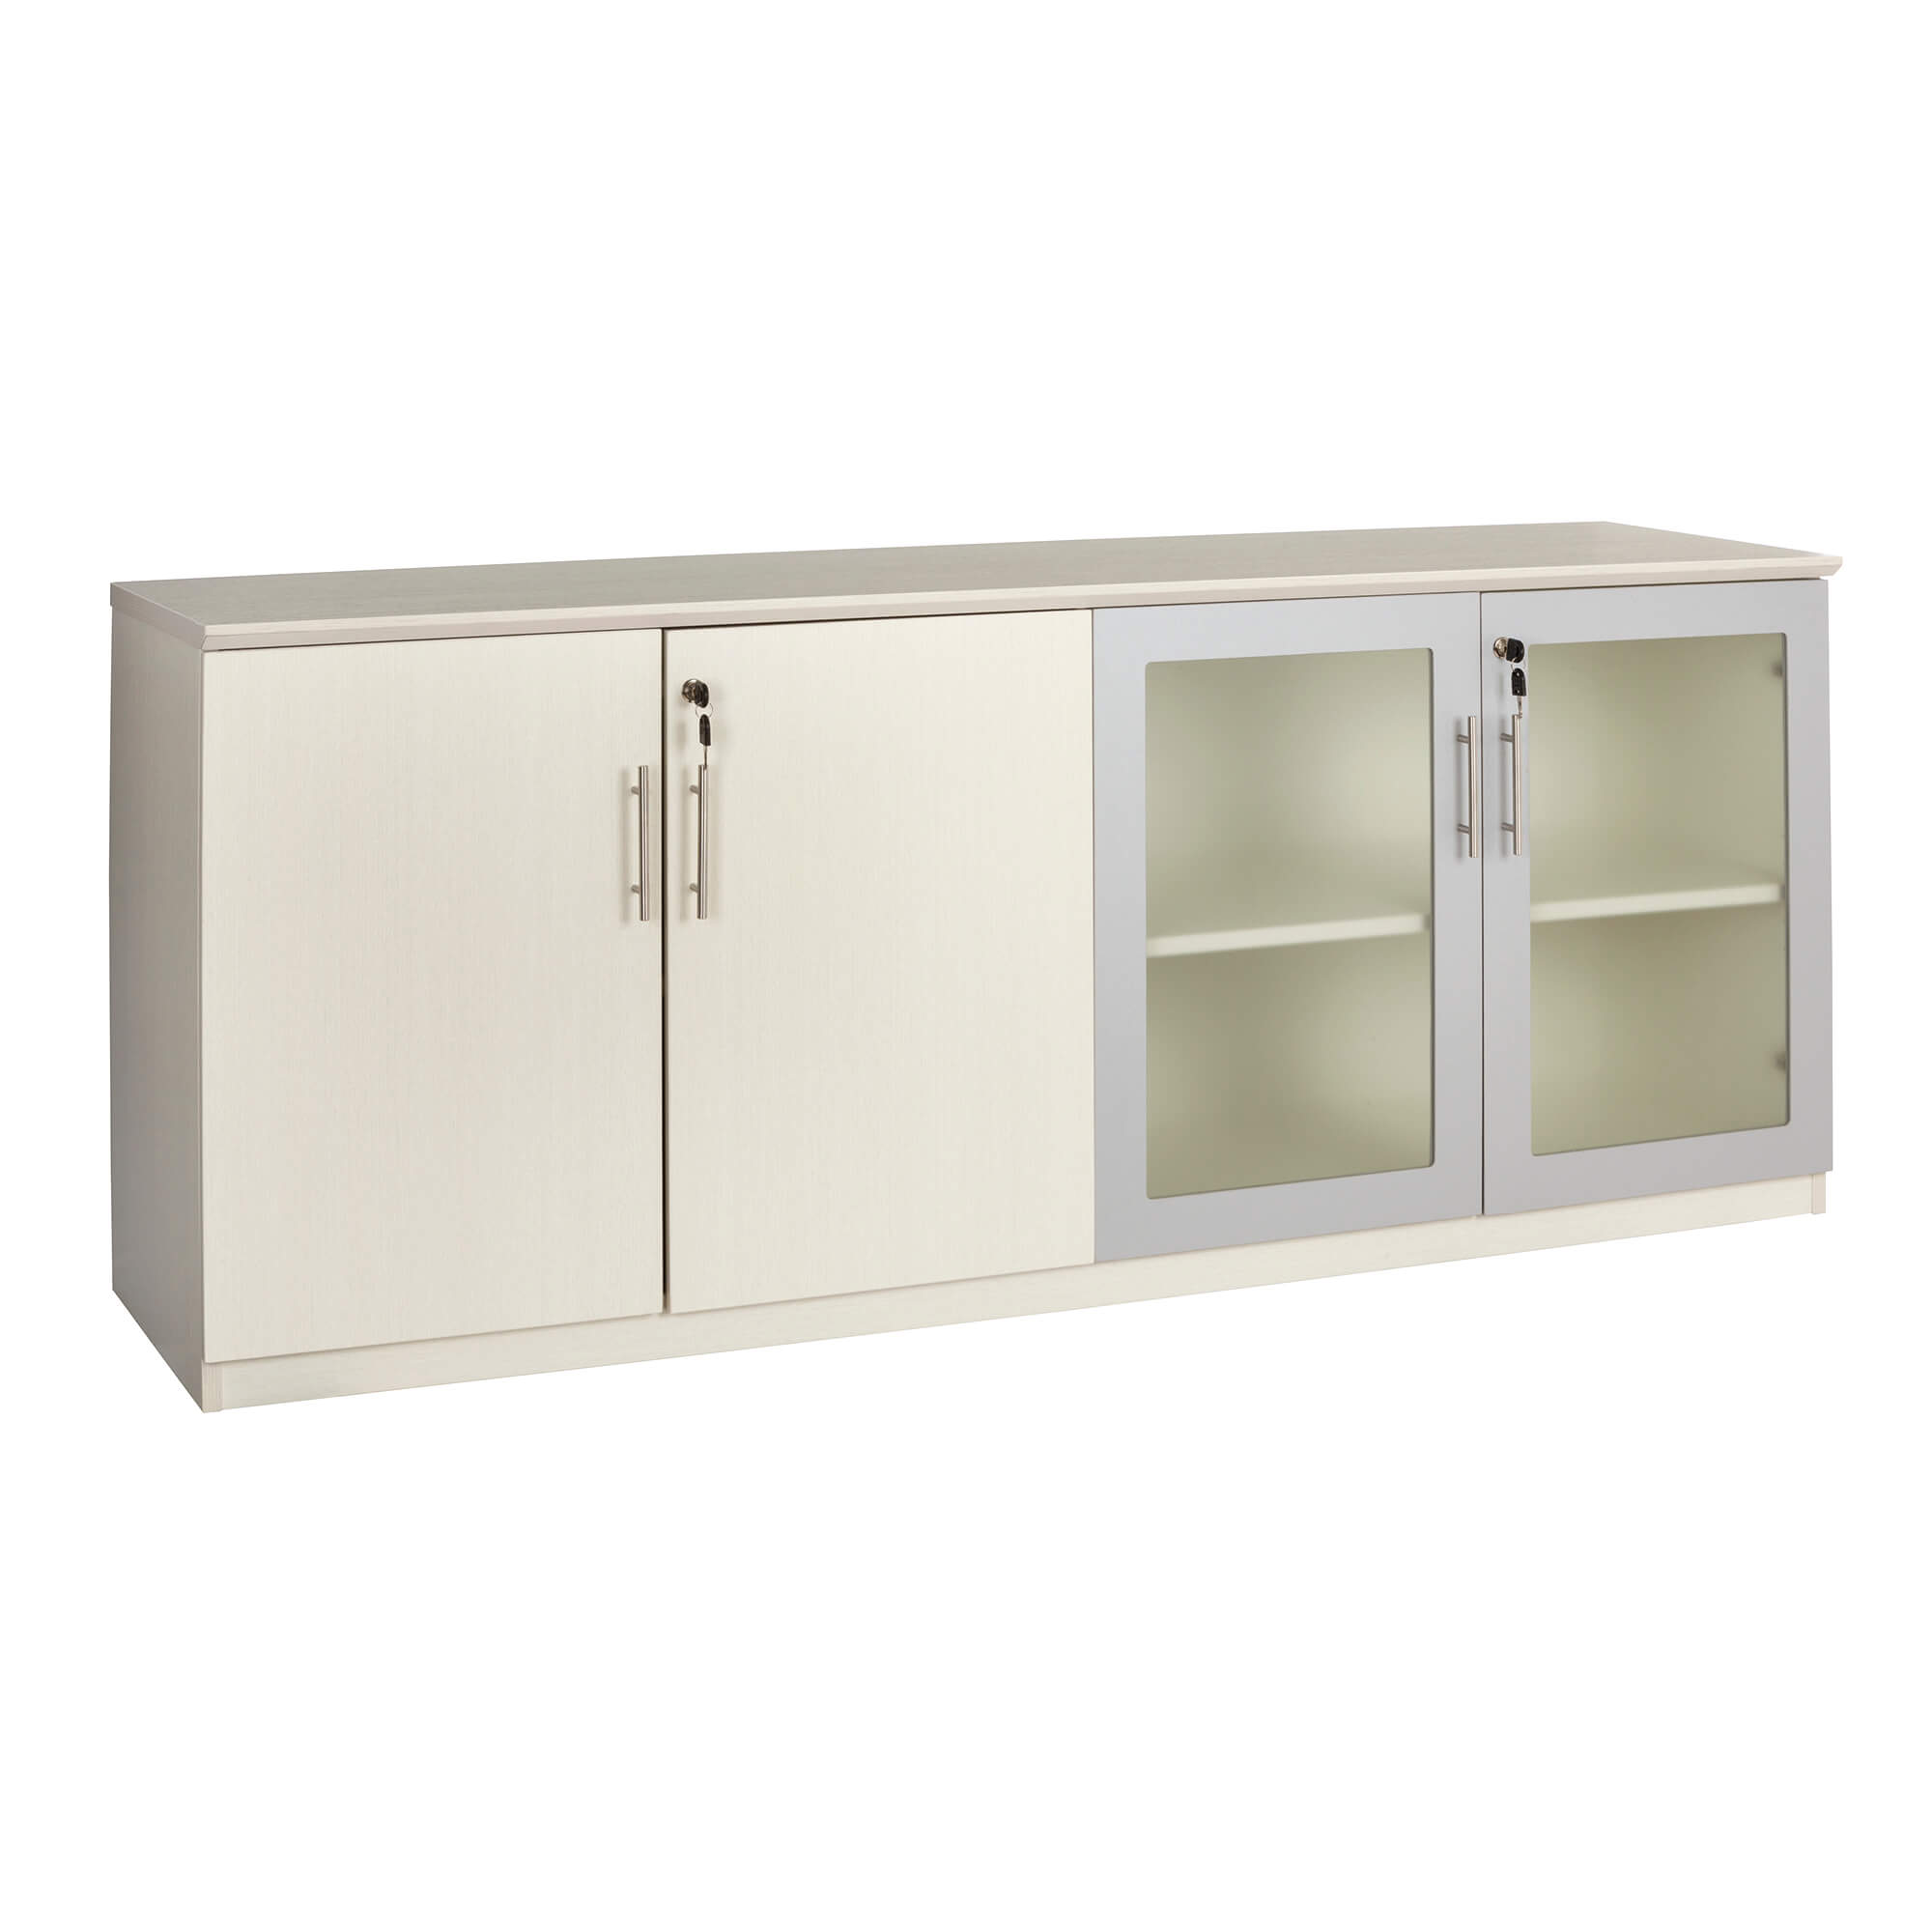 Conference room storage and accessories CUB MVLCTSS FAS